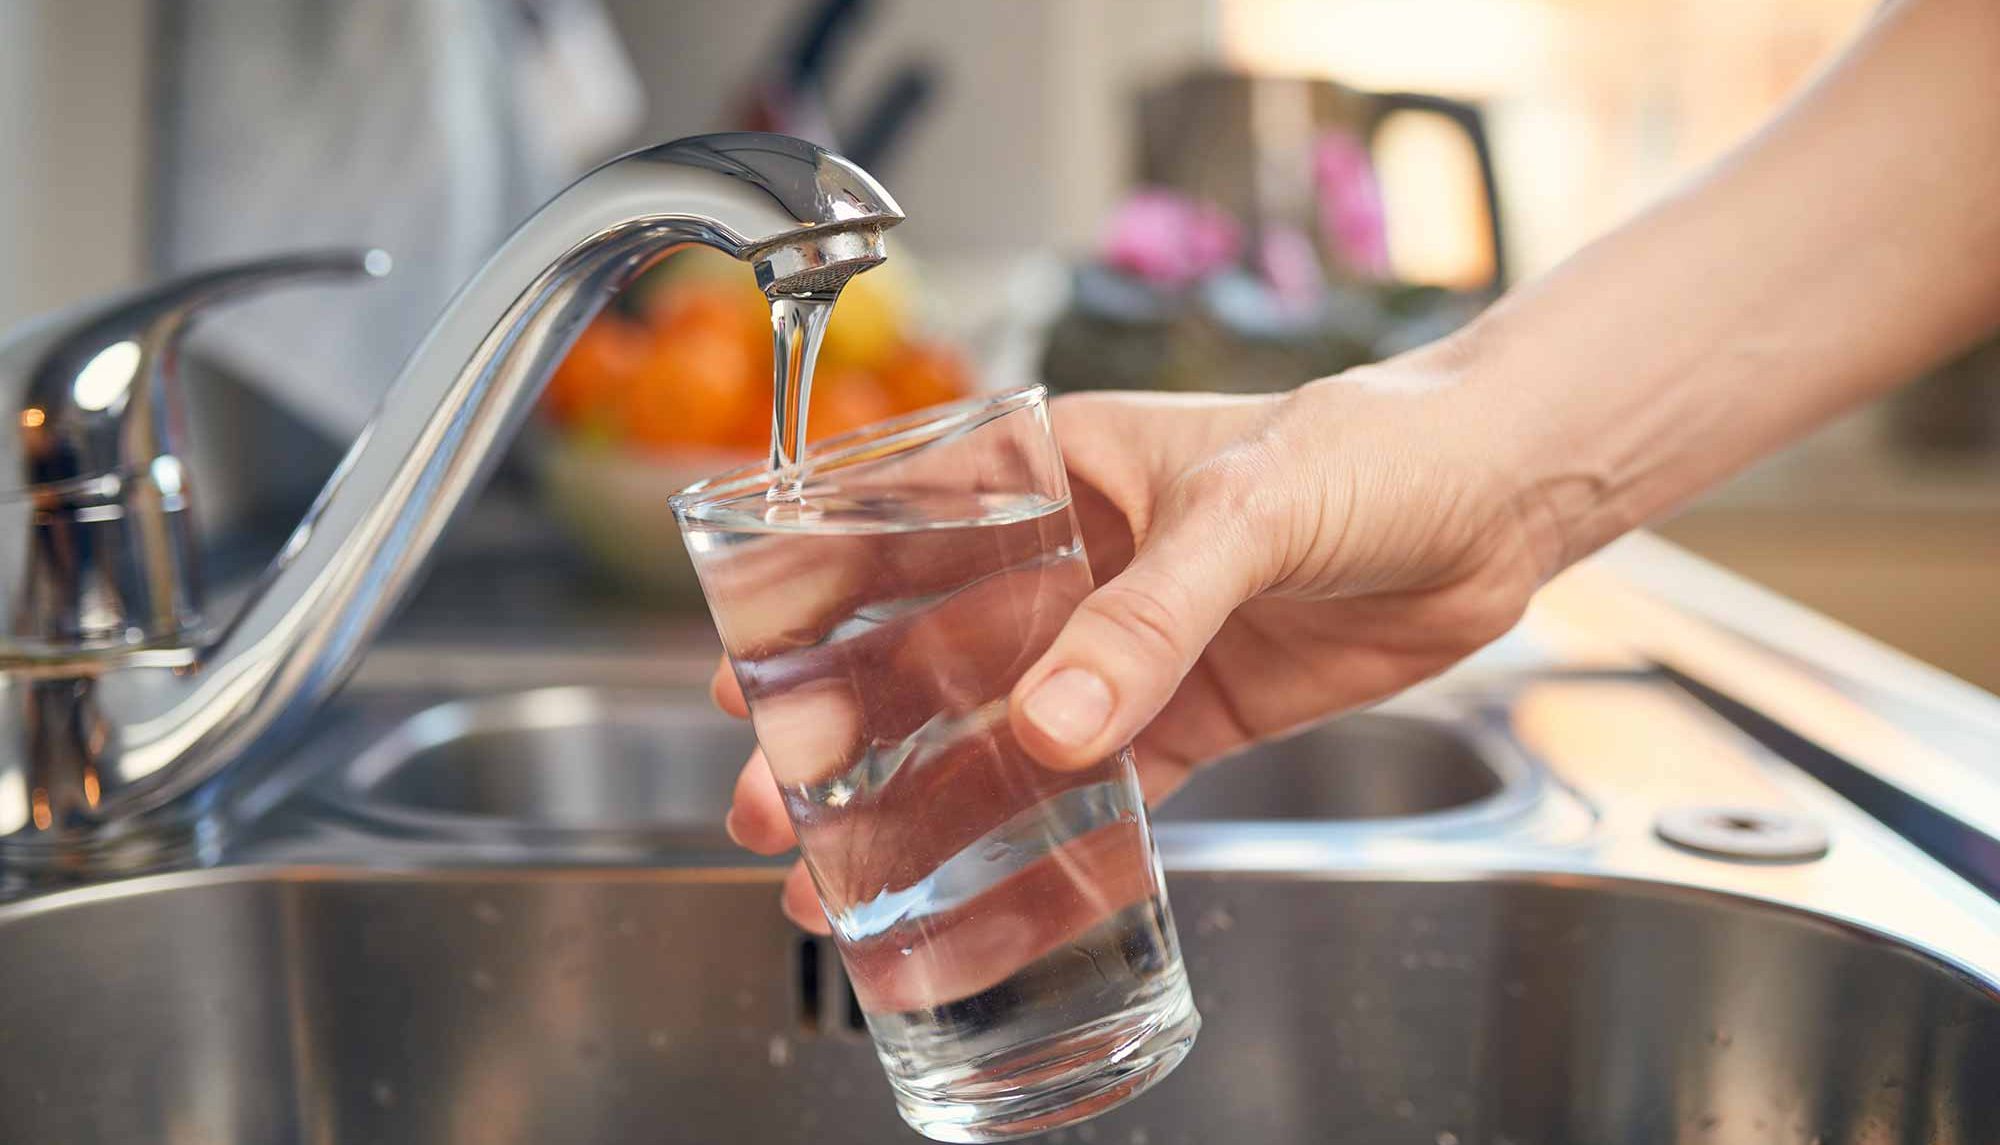 Water fluoridation discussed in a recent House of Commons debate